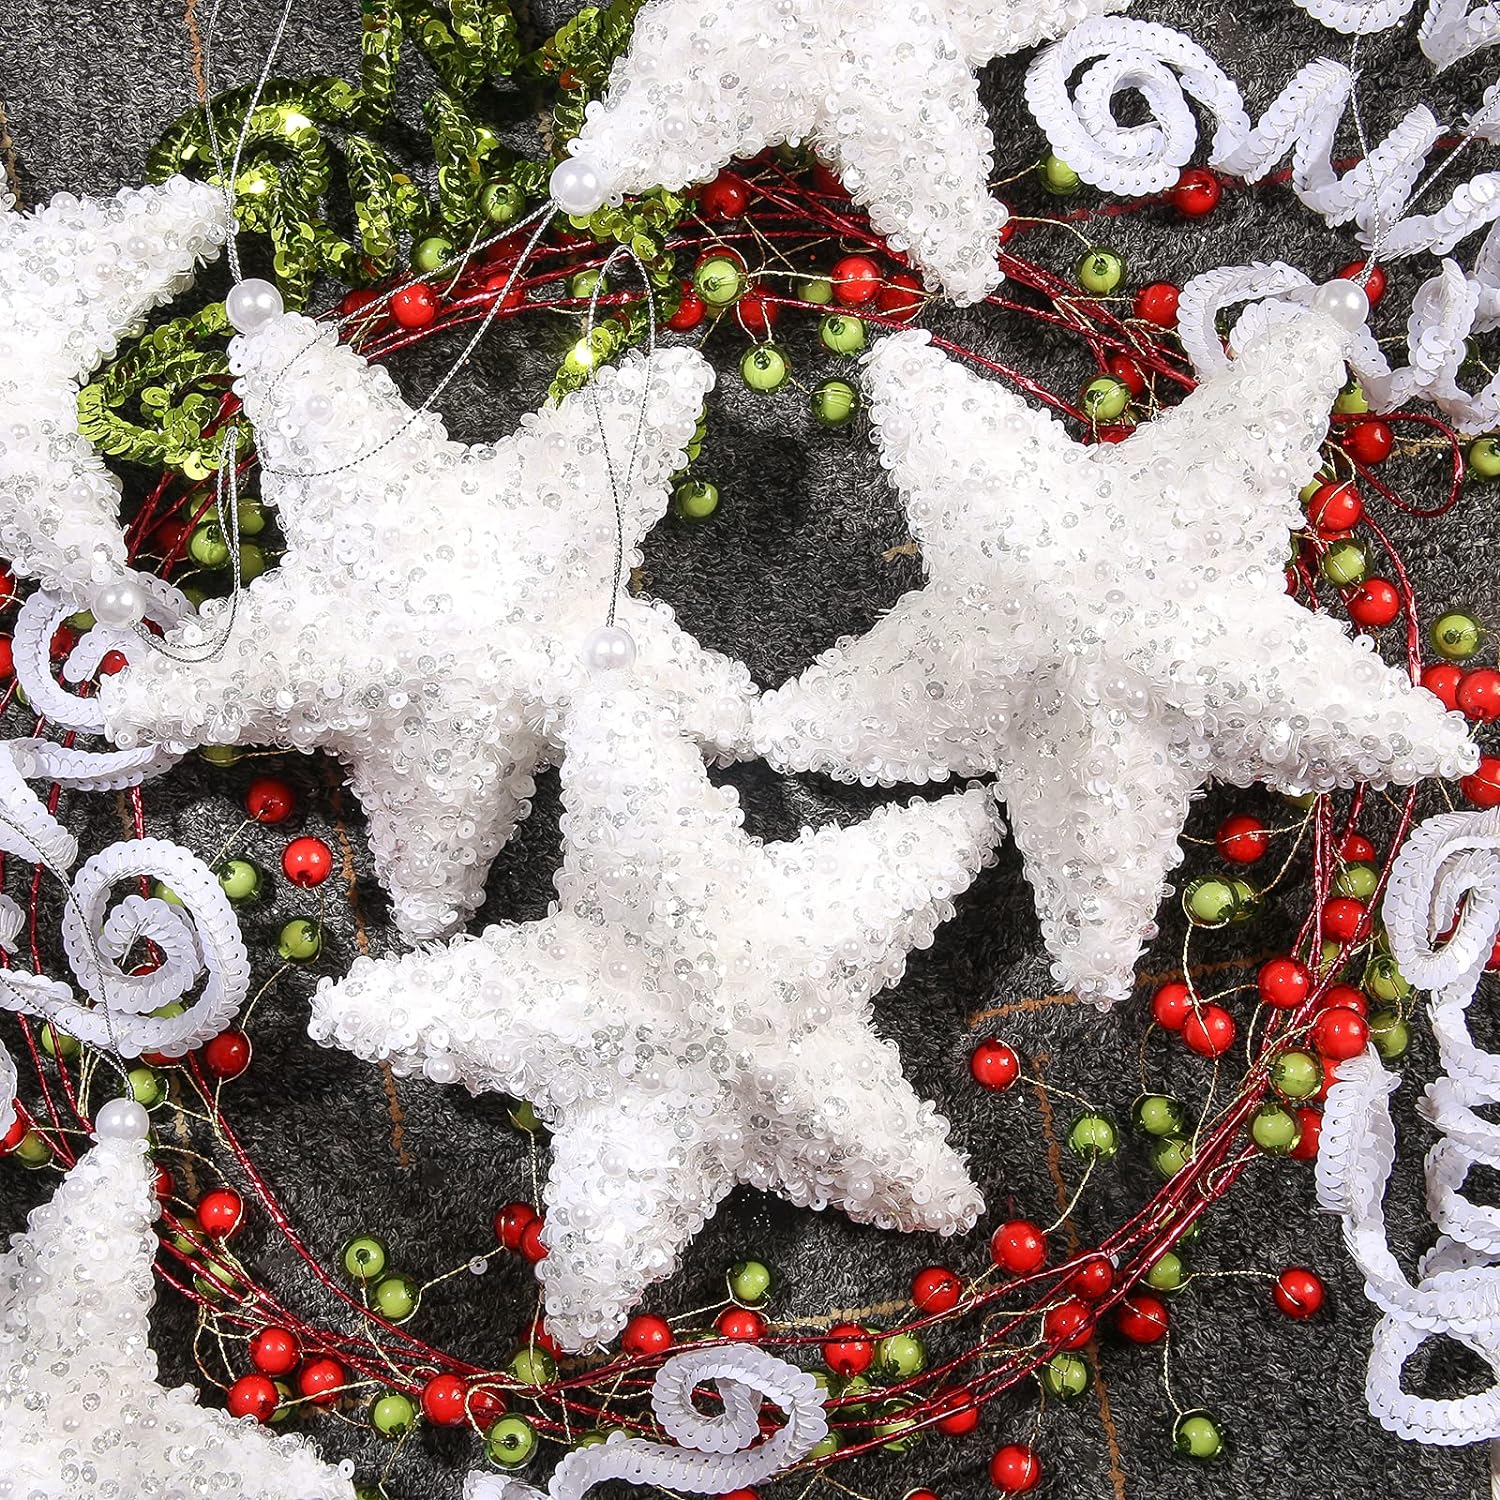 thinkstar 6" Five-Pointed Star Christmas Ornaments,4Pc Set White Christmas Decorations Star For Xmas Trees Hanging Ornaments, Wedding…